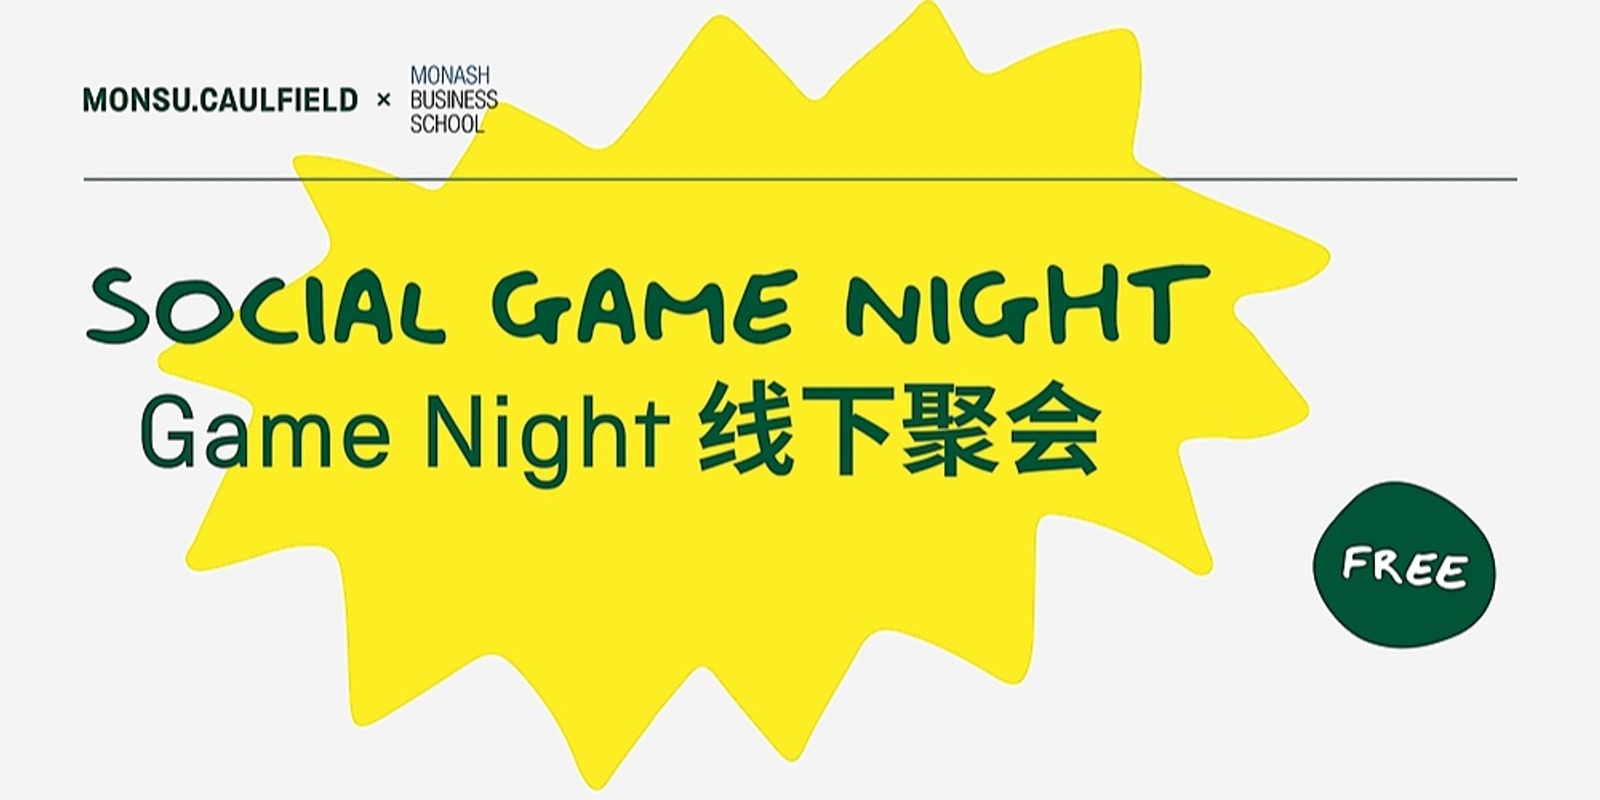 Banner image for Social Games Event in Shanghai, China—MONSU Caulfield + MBUS